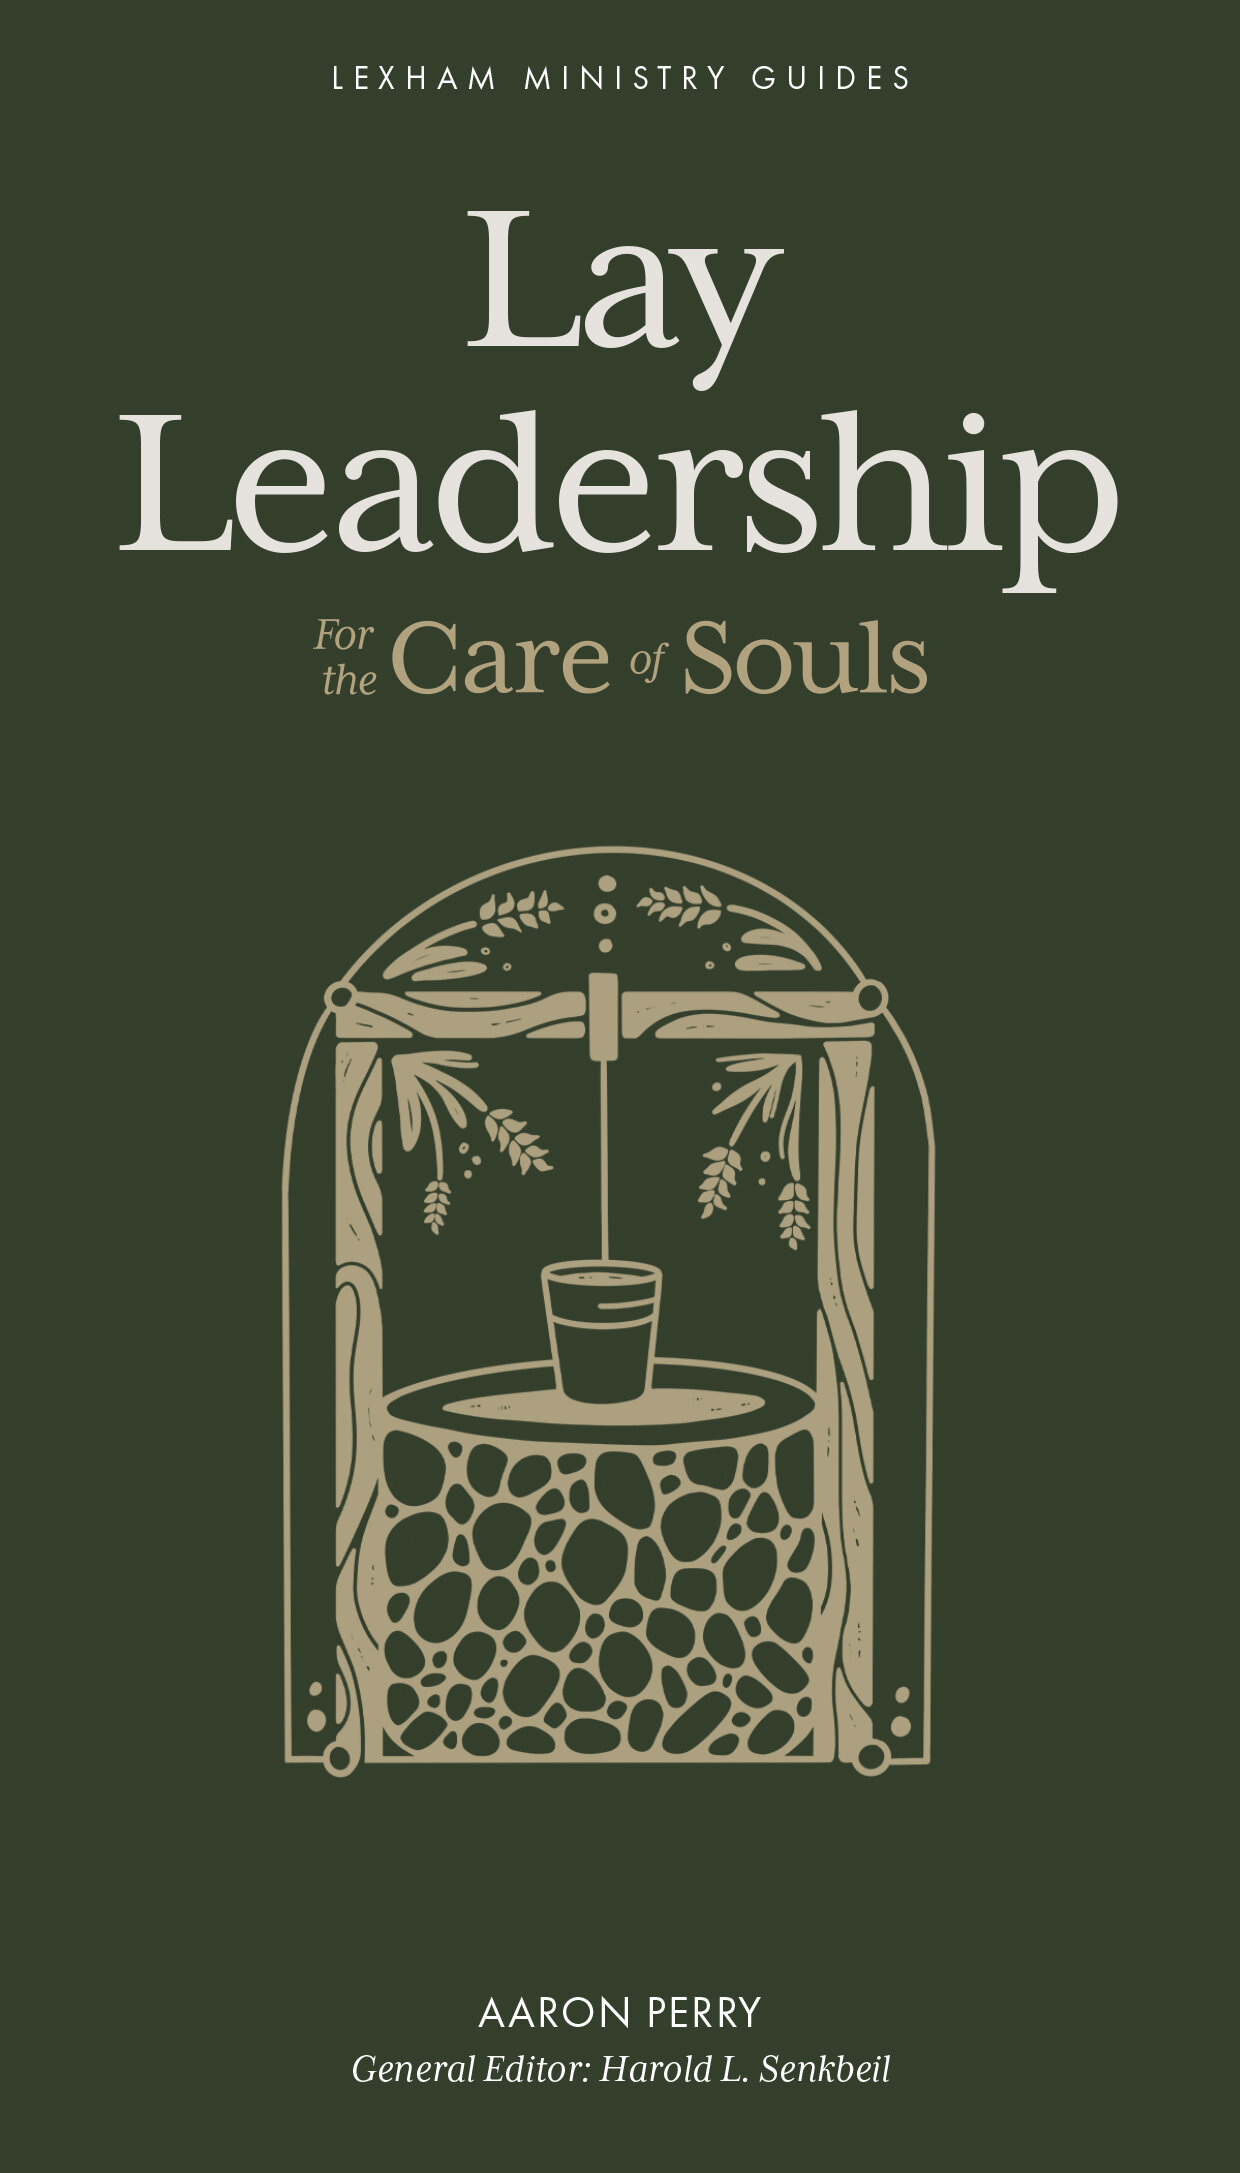 Lay Leadership: For the Care of Souls (Lexham Ministry Guides)